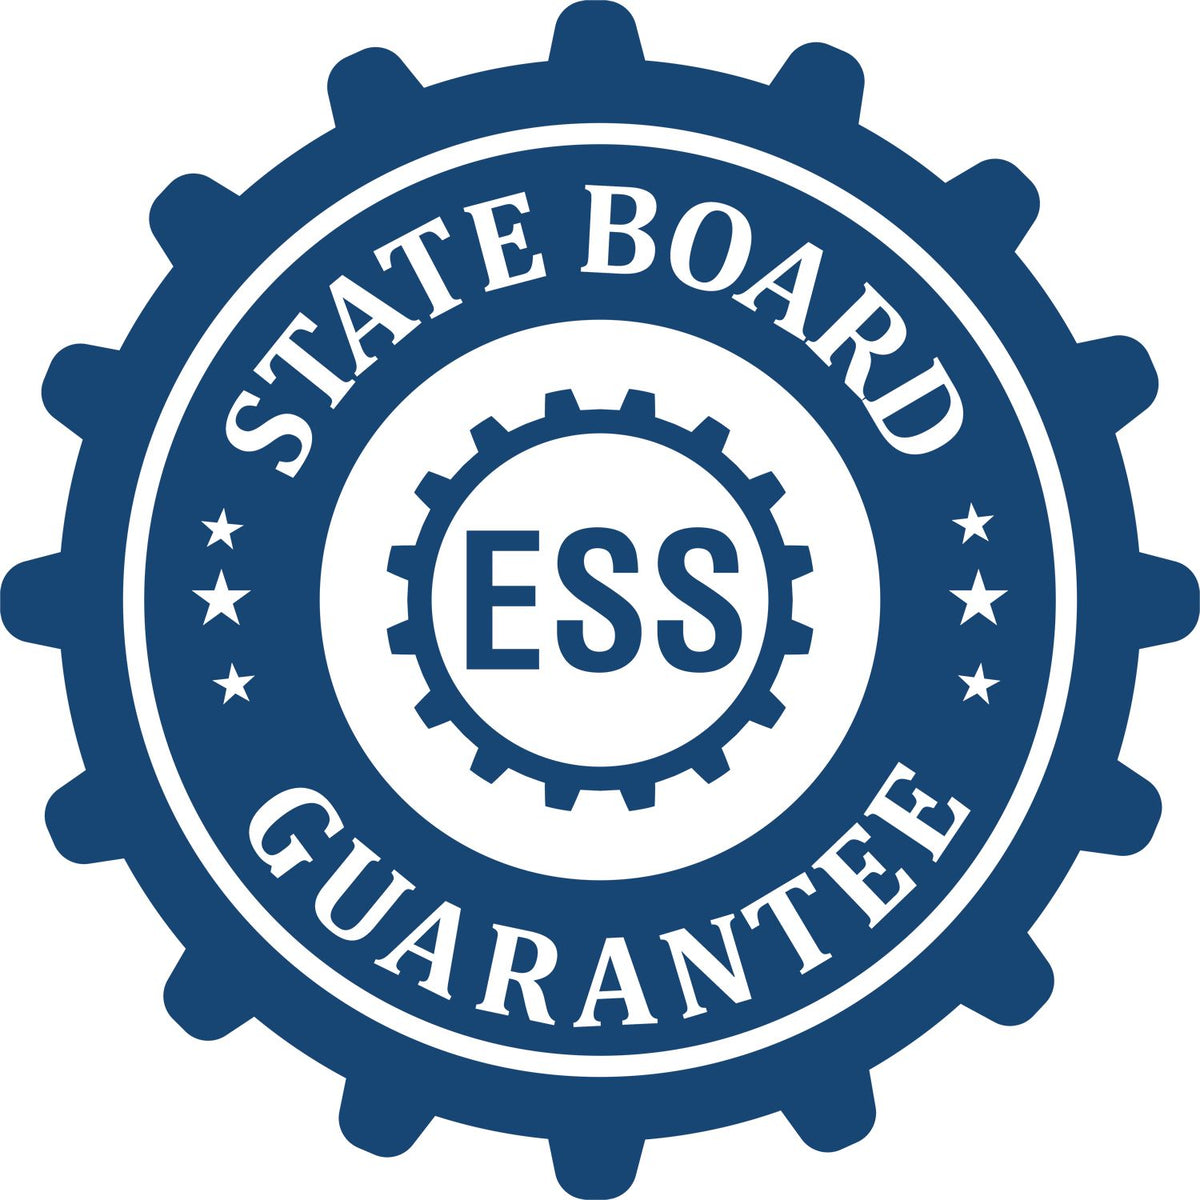 An emblem in a gear shape illustrating a state board guarantee for the Digital New Mexico Geologist Stamp, Electronic Seal for New Mexico Geologist